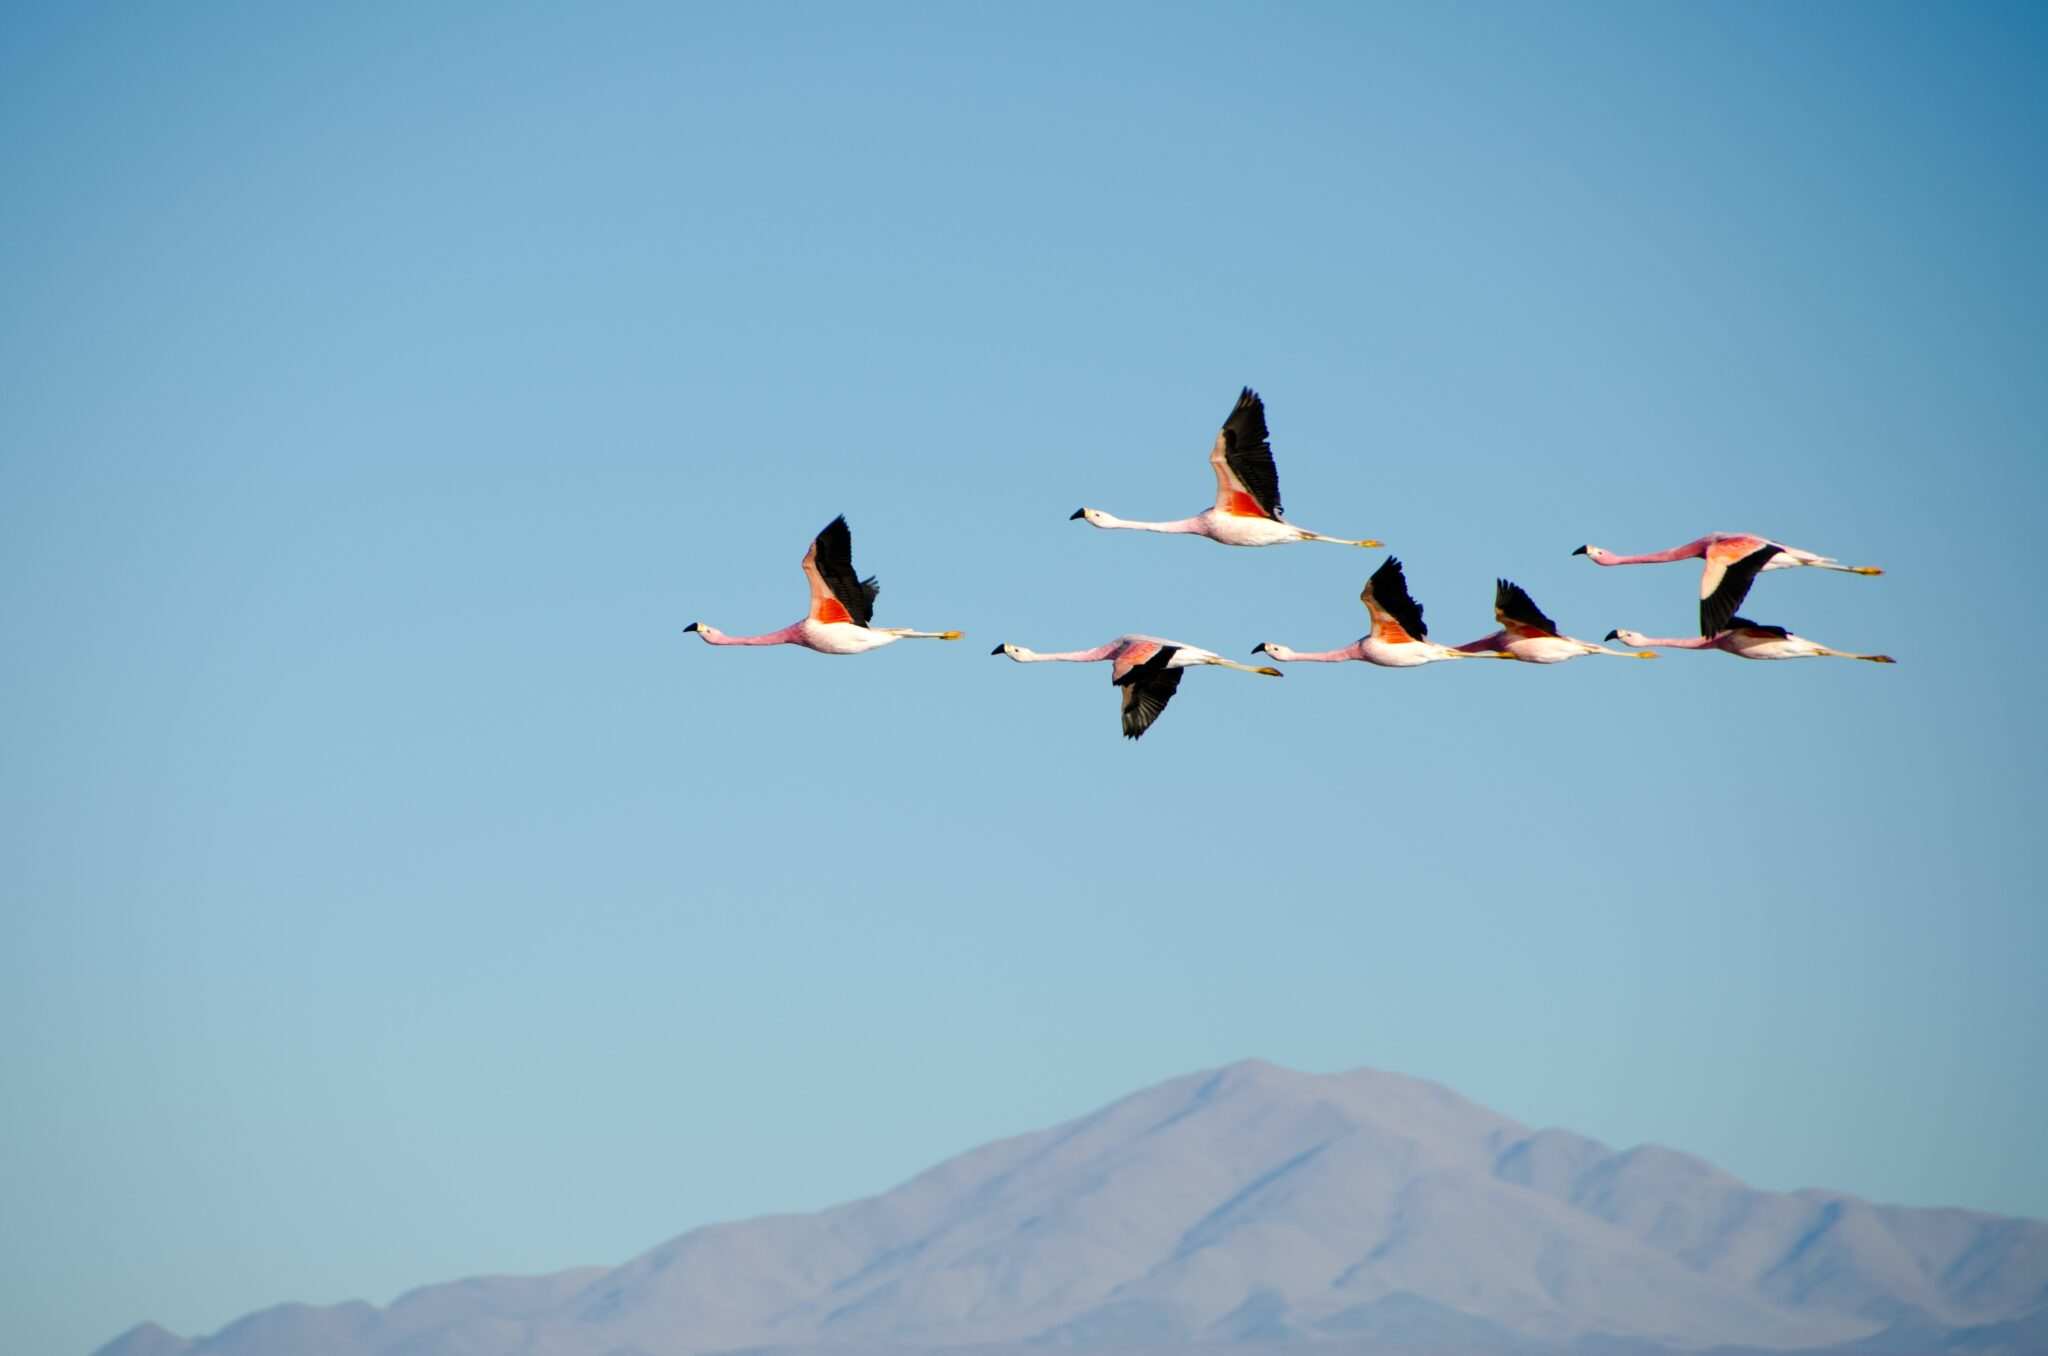 Flamingos in Chile, where you may need a corporate legal firm to provide legal services